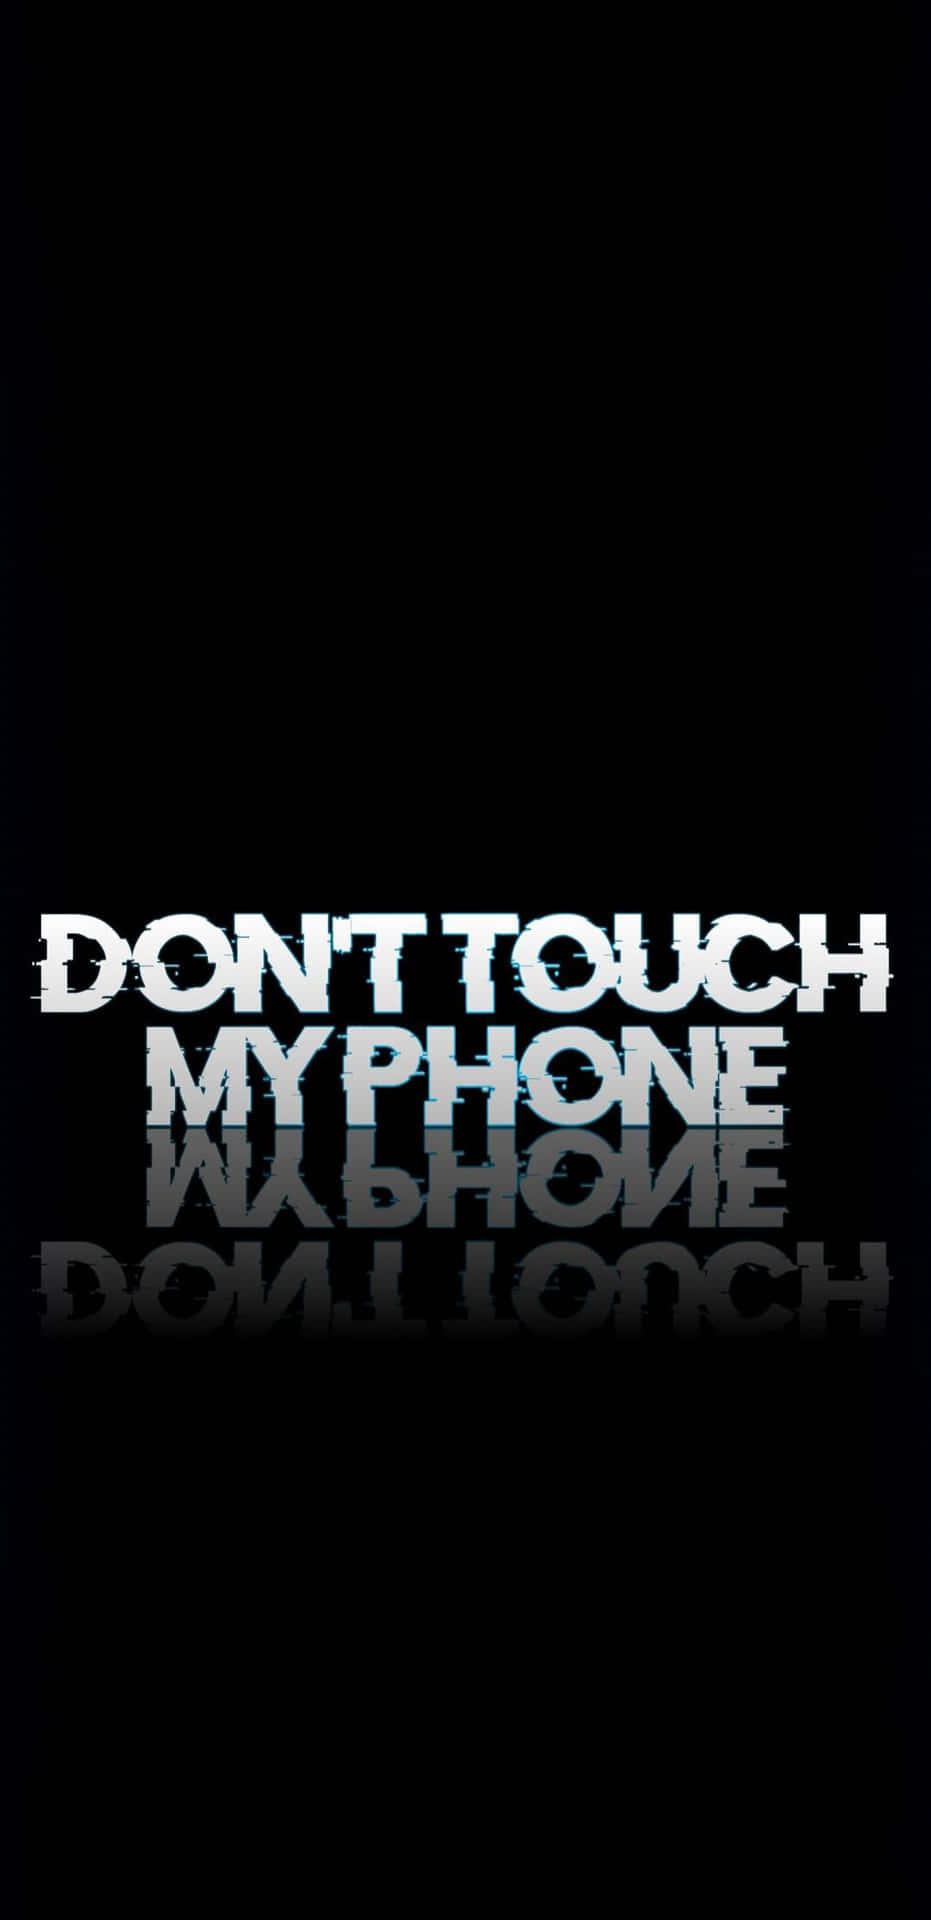 Don't Touch My Phone - Wallpaper Wallpaper